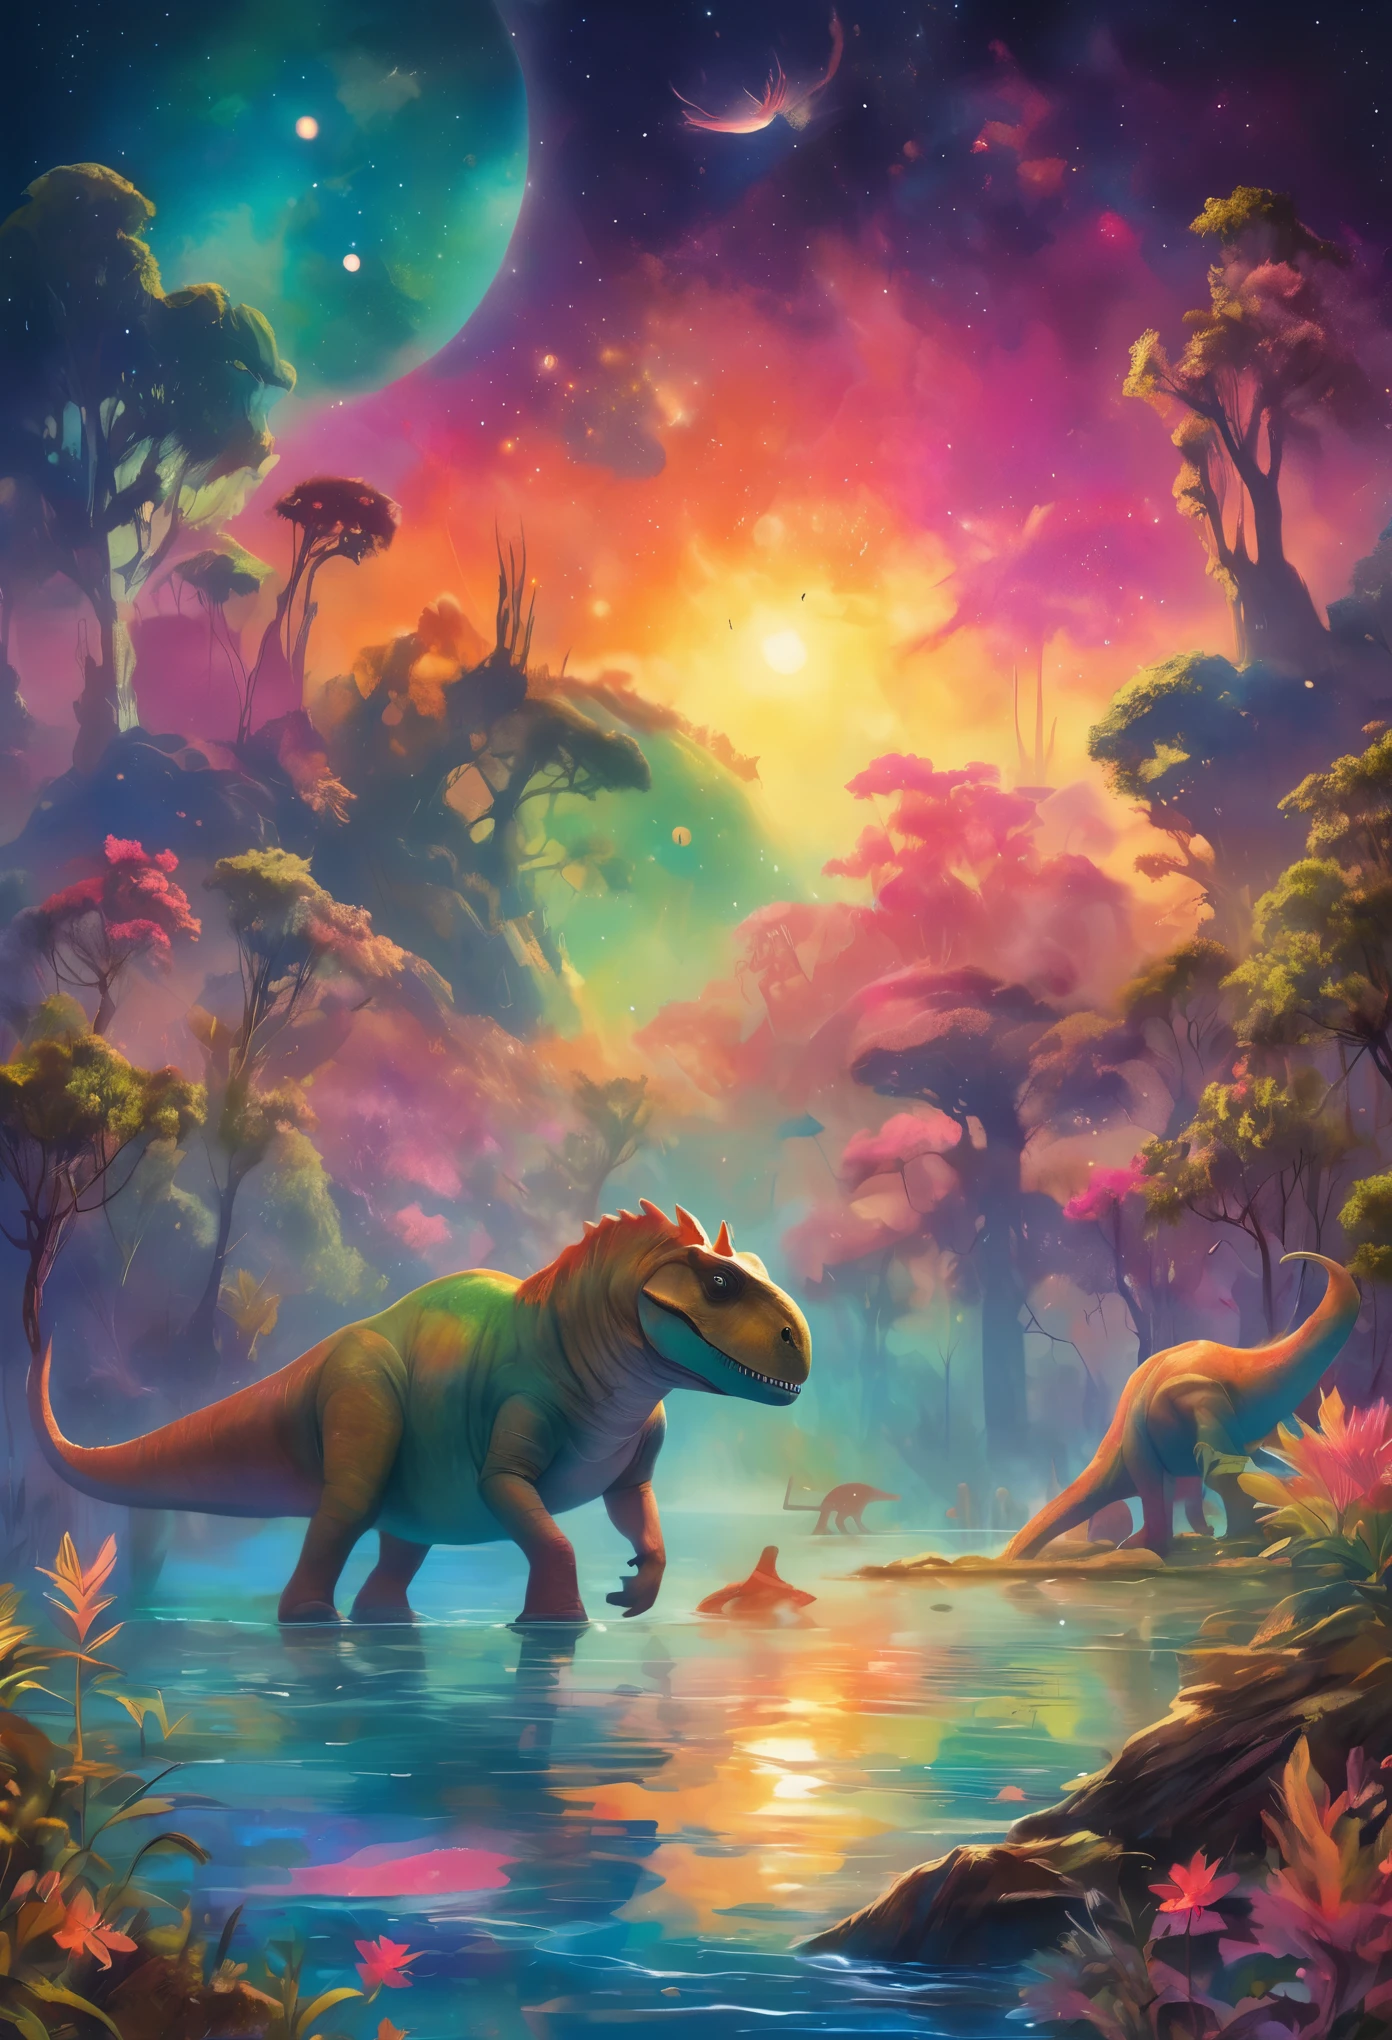 At the edge of a serene lagoon that reflects the colors of the cosmos, a family of multi-colored Parasaurolophuses grazes peacefully. The water shimmers with hues of pink, blue, and green, mirroring the vibrant patterns on the dinosaurs' skin. Surrounding the lagoon are plants that glow with an inner light, their leaves pulsing in sync with the rhythm of the universe. Above, planets and moons drift lazily across a star-studded sky, casting a tranquil glow over this idyllic, psychedelic scene.
, the scene is captured in dimly lit dark fantasy but vibrant colors, with bold ink lines defining form against the watercolor wash of the aged paper